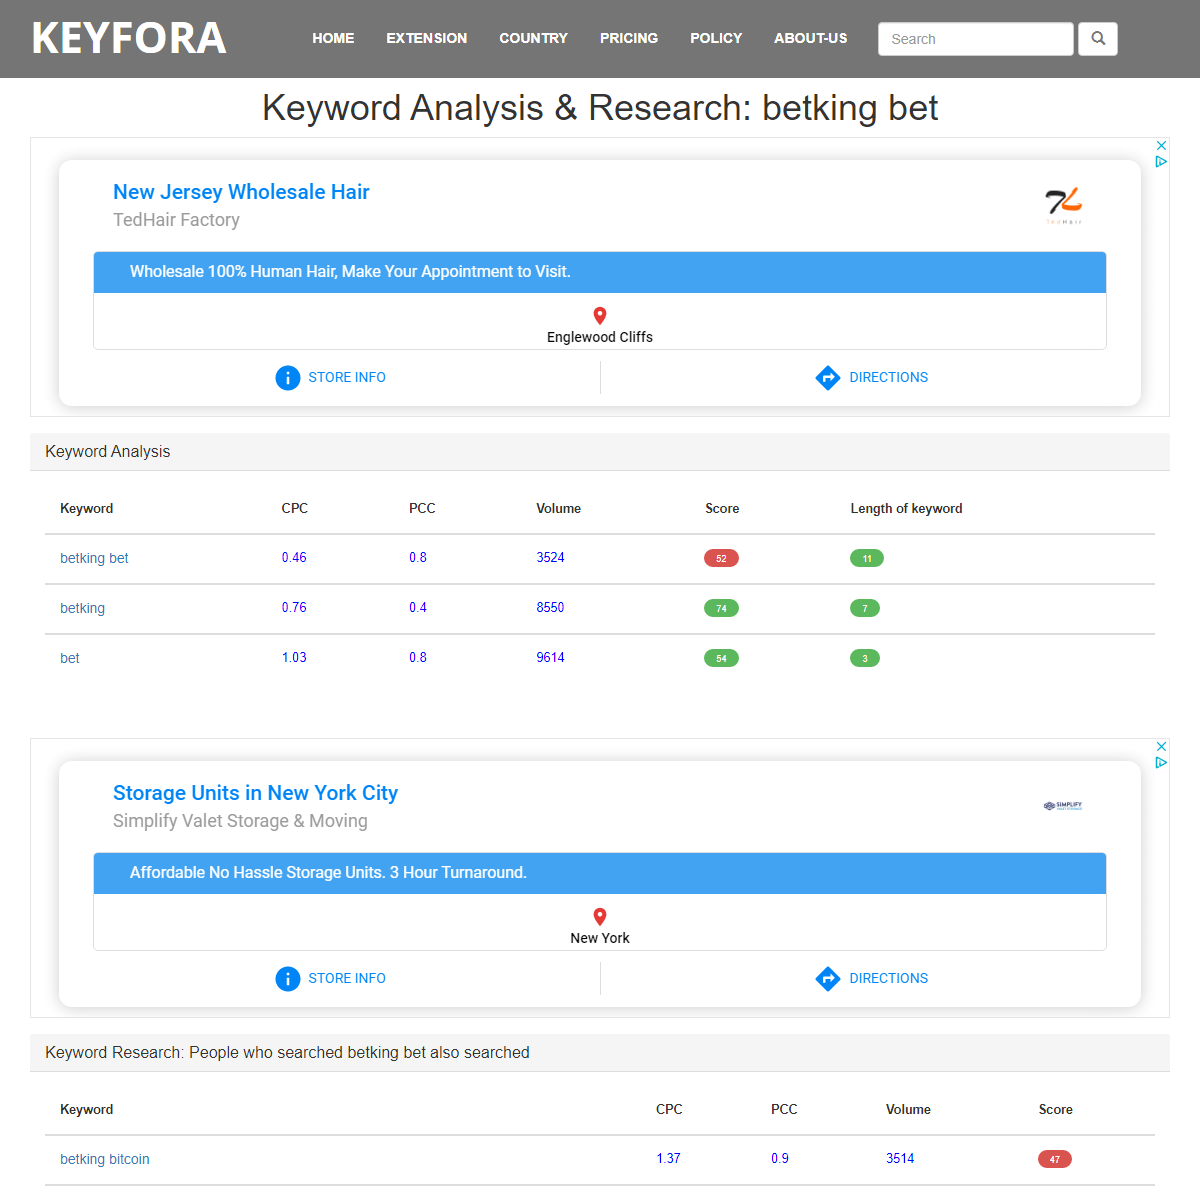 A complete backup of https://www.keyfora.com/search/betking-bet